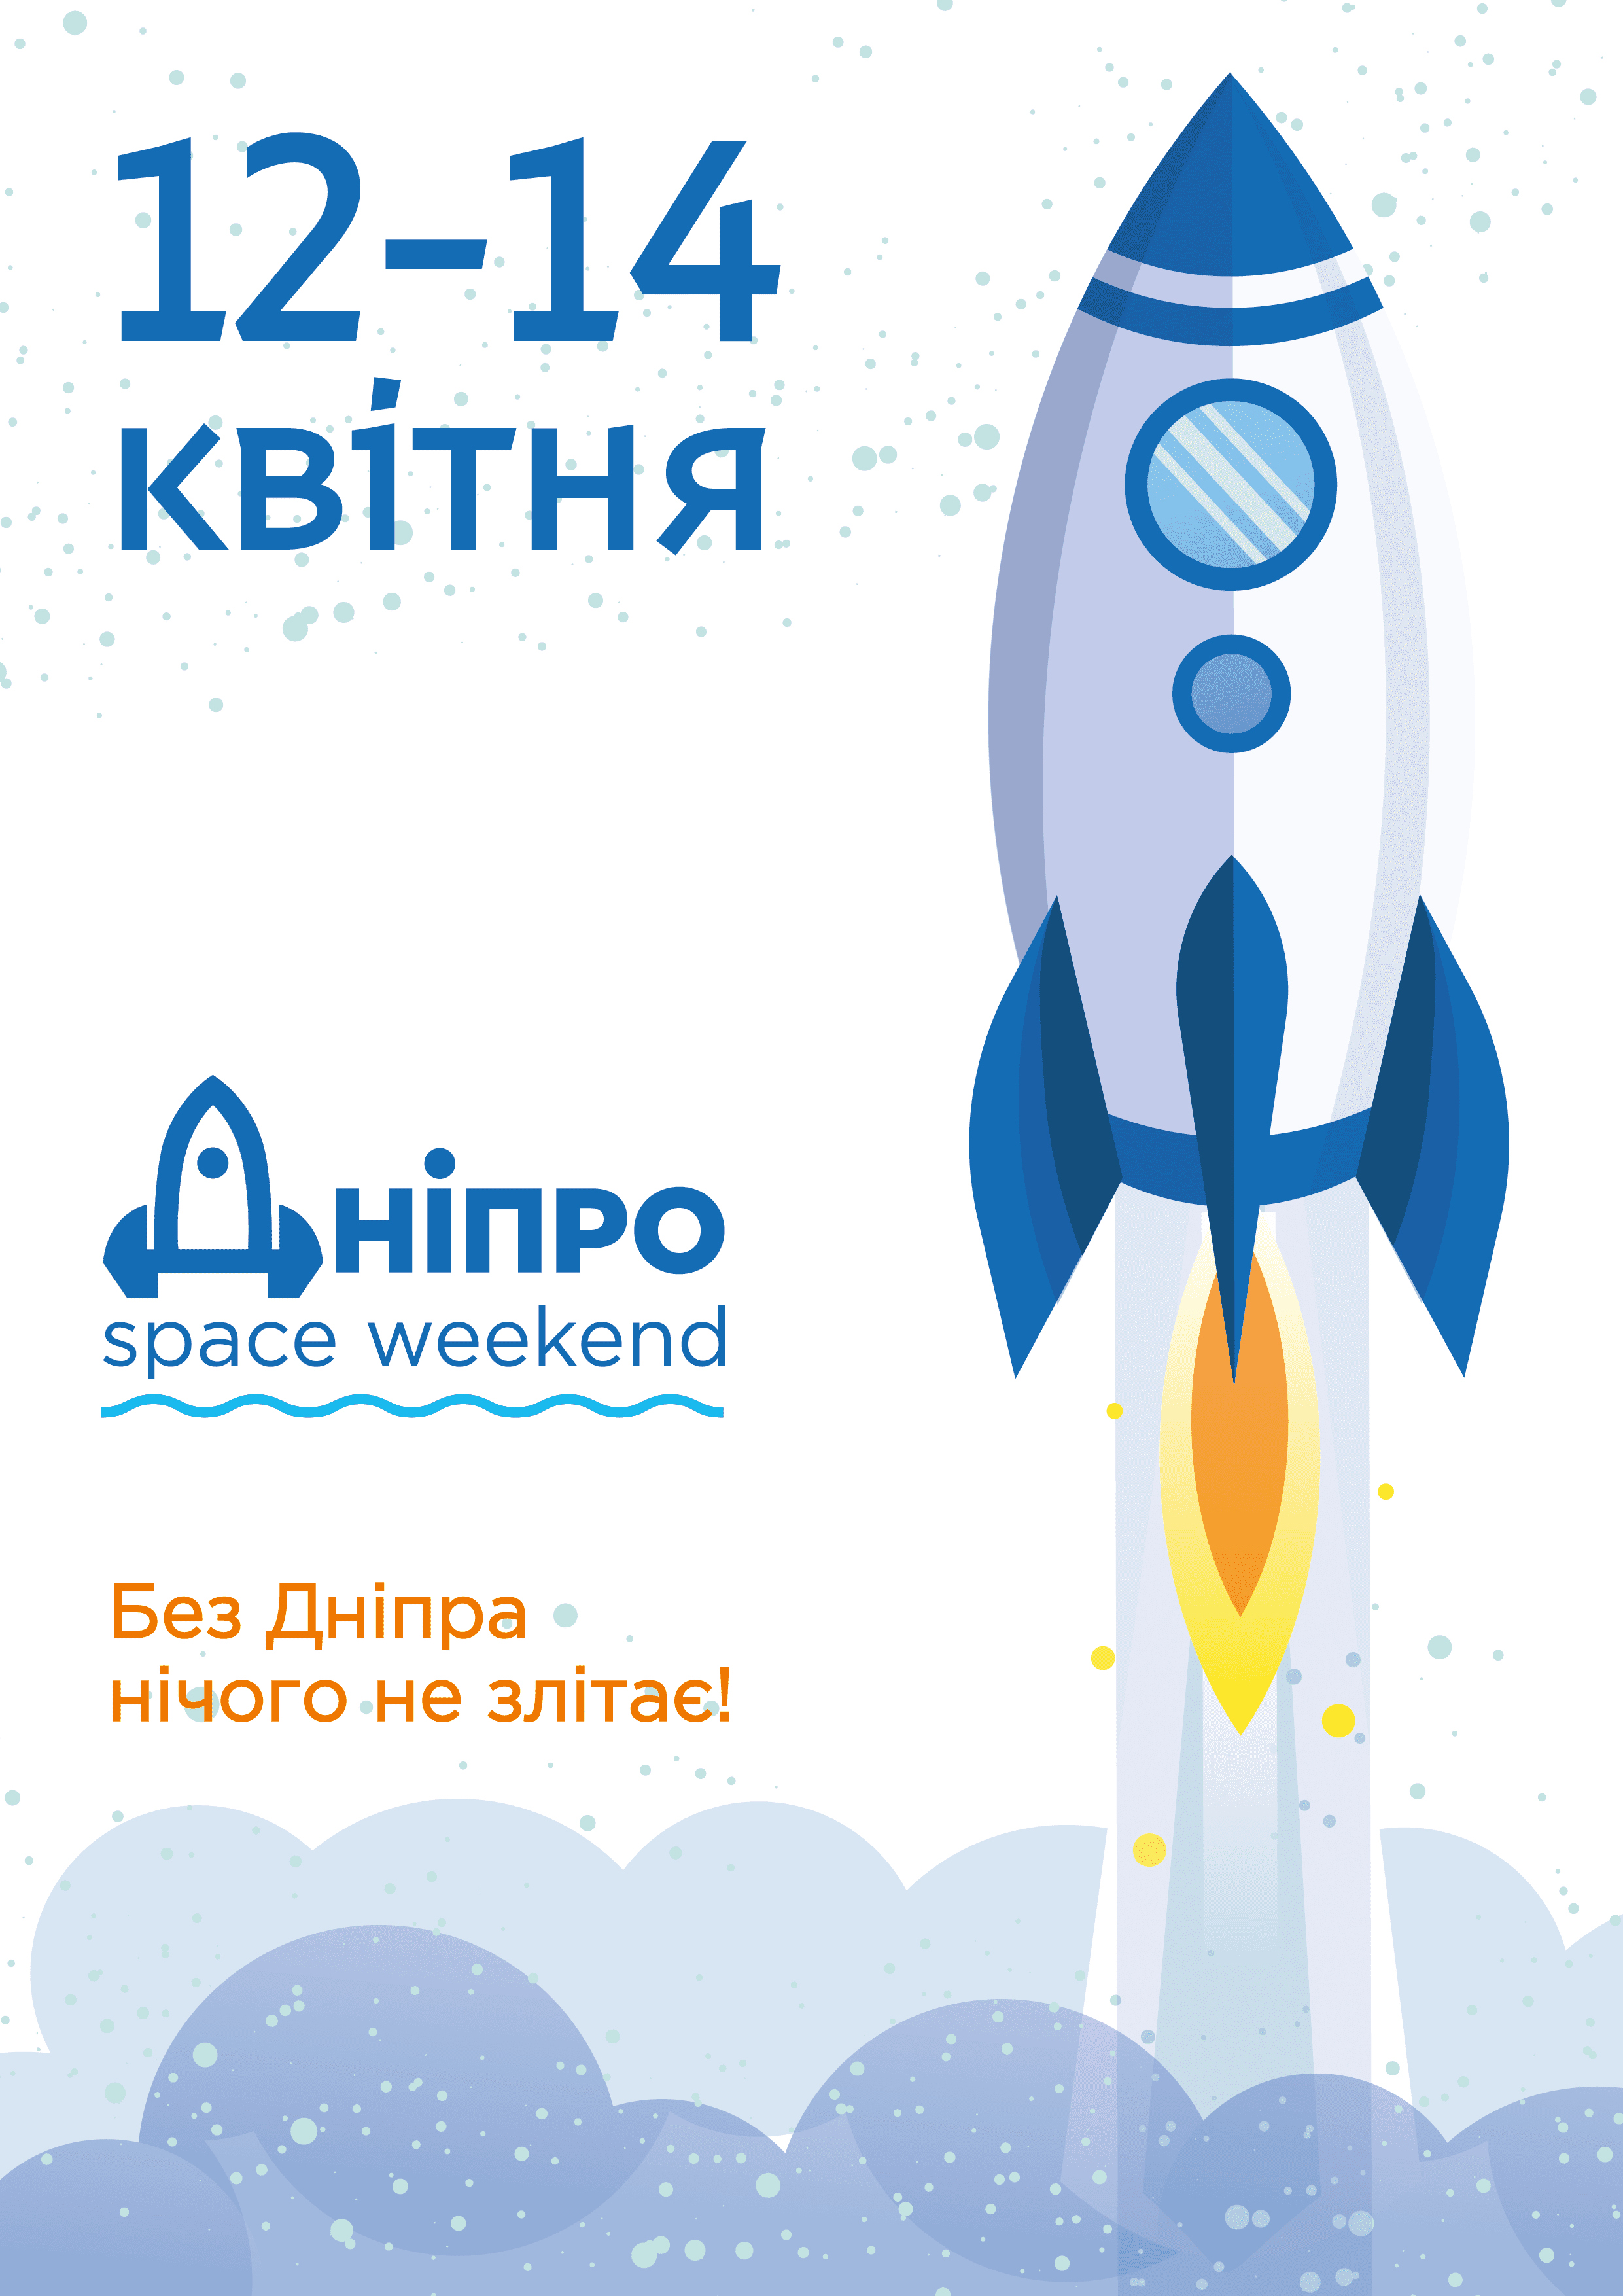 Dnipro Space Weekend полная программа Днепр, 12-13.04.2019. Афиша Днепра